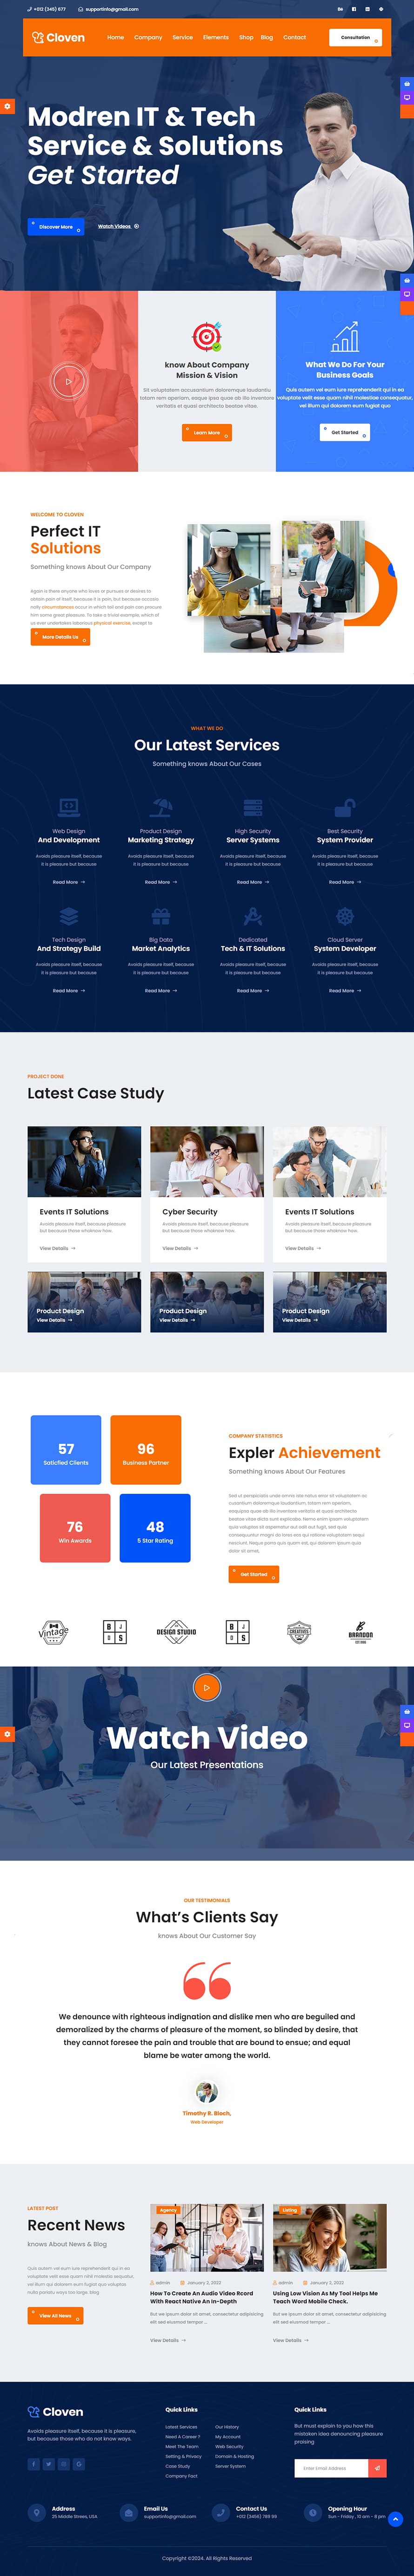 Cloven – IT Solutions Services Company WordPress Theme